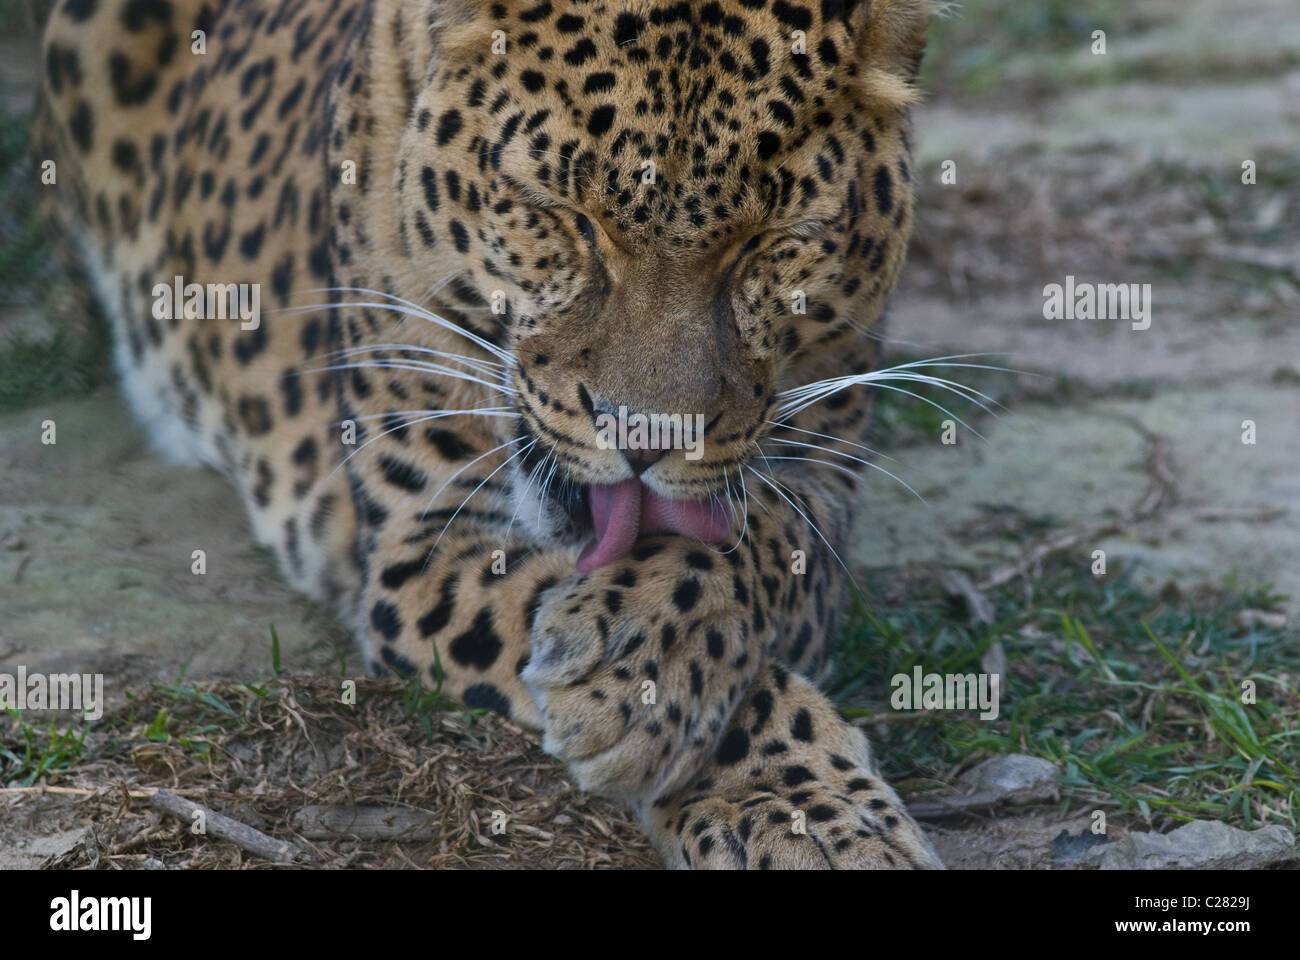 A leopard washes itself like a cat Stock Photo